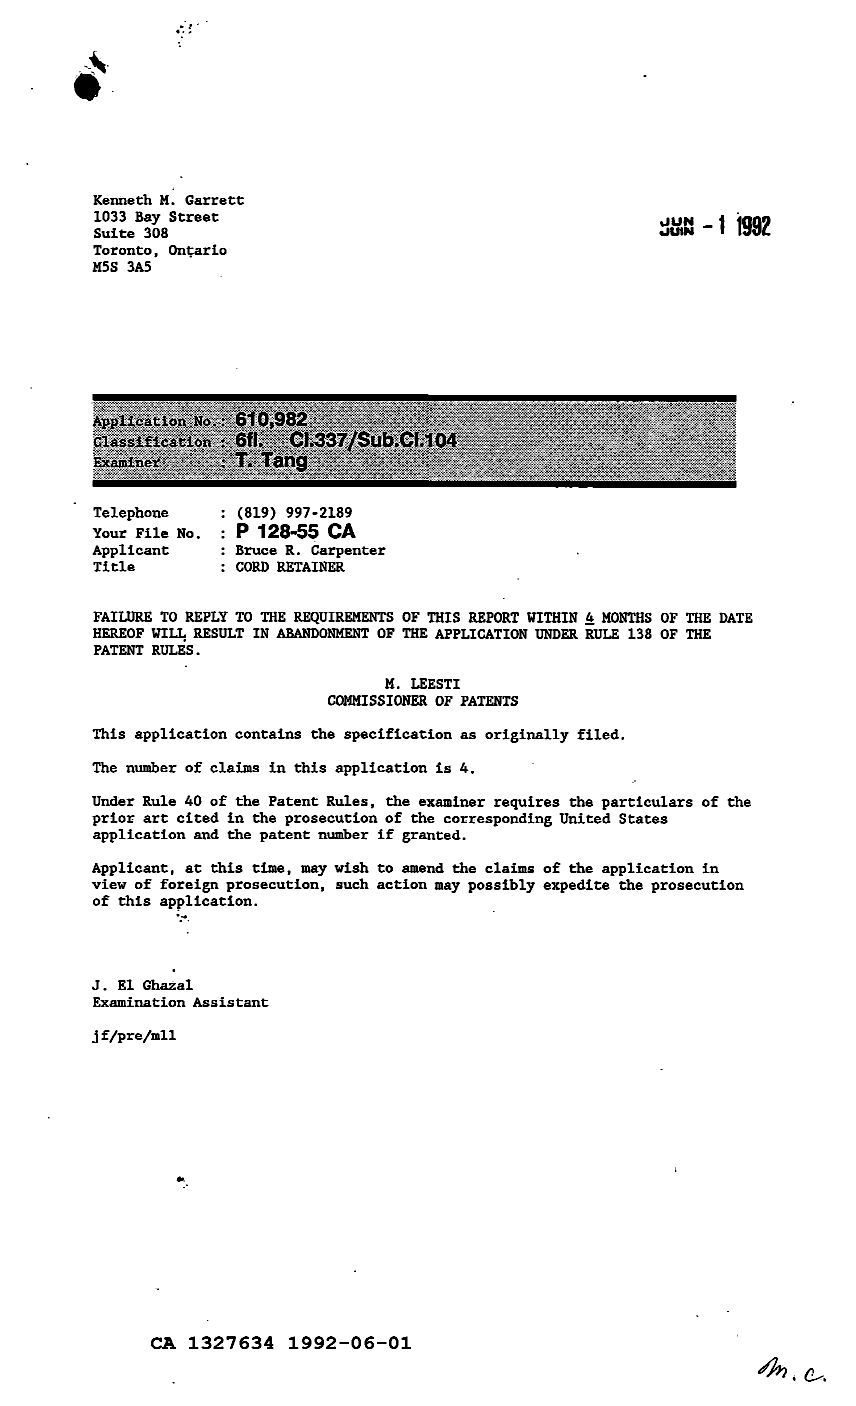 Canadian Patent Document 1327634. Examiner Requisition 19920601. Image 1 of 2